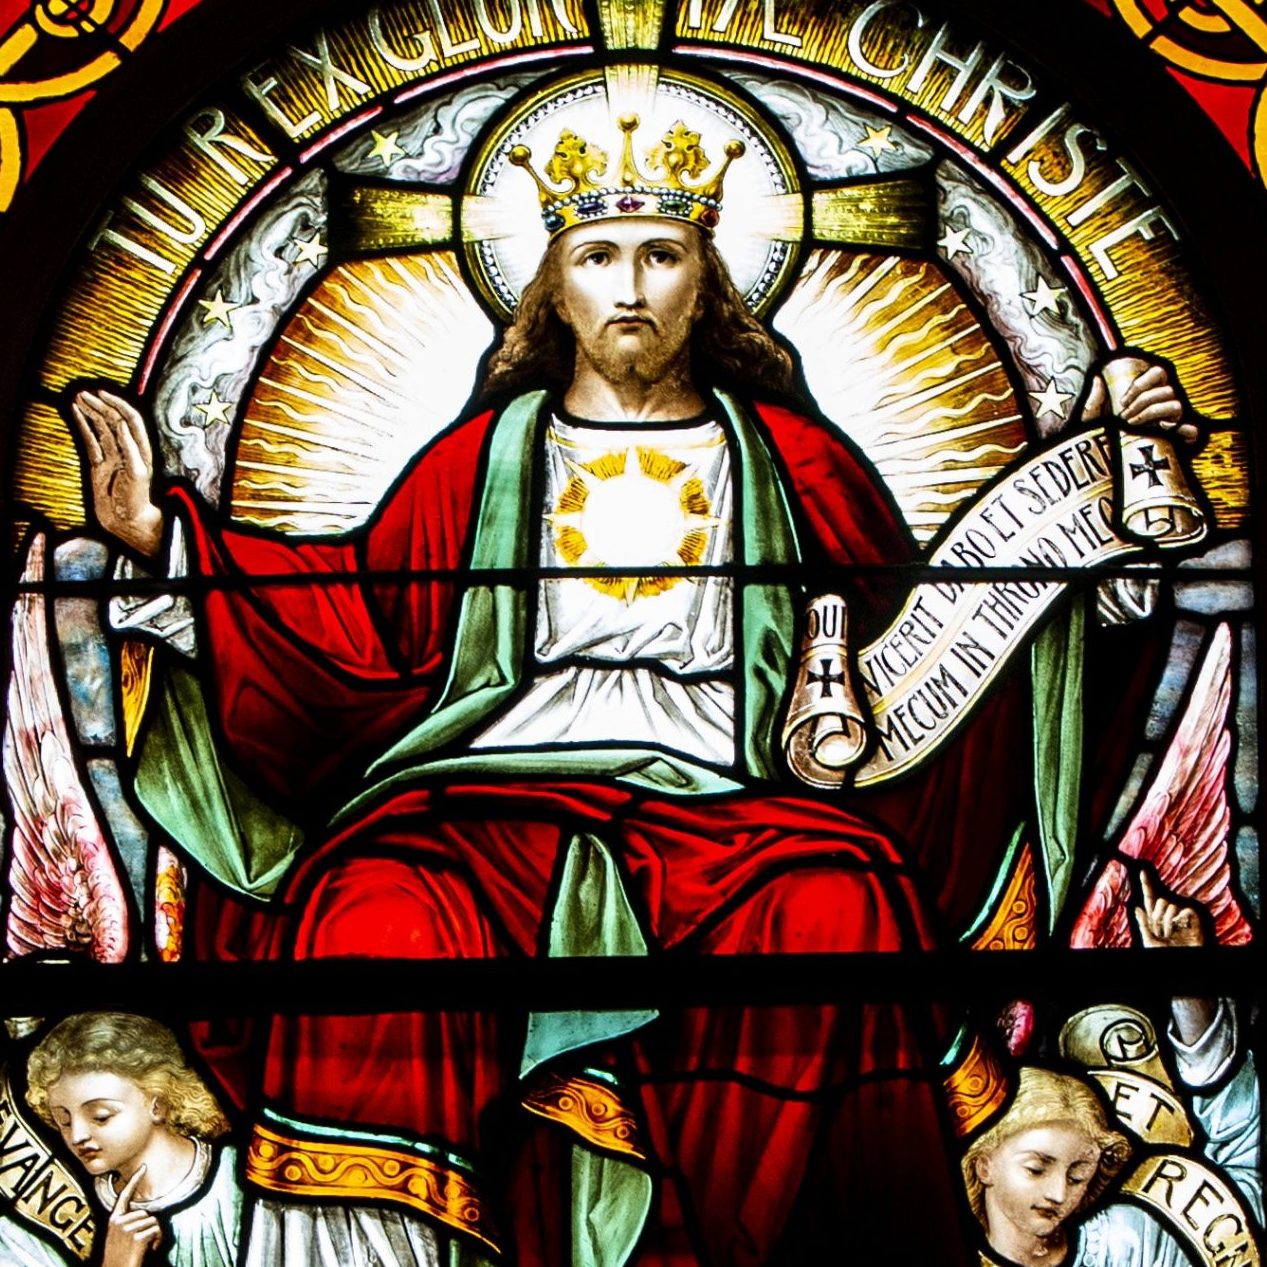 Celebrate the feast of Christ the King with novena.